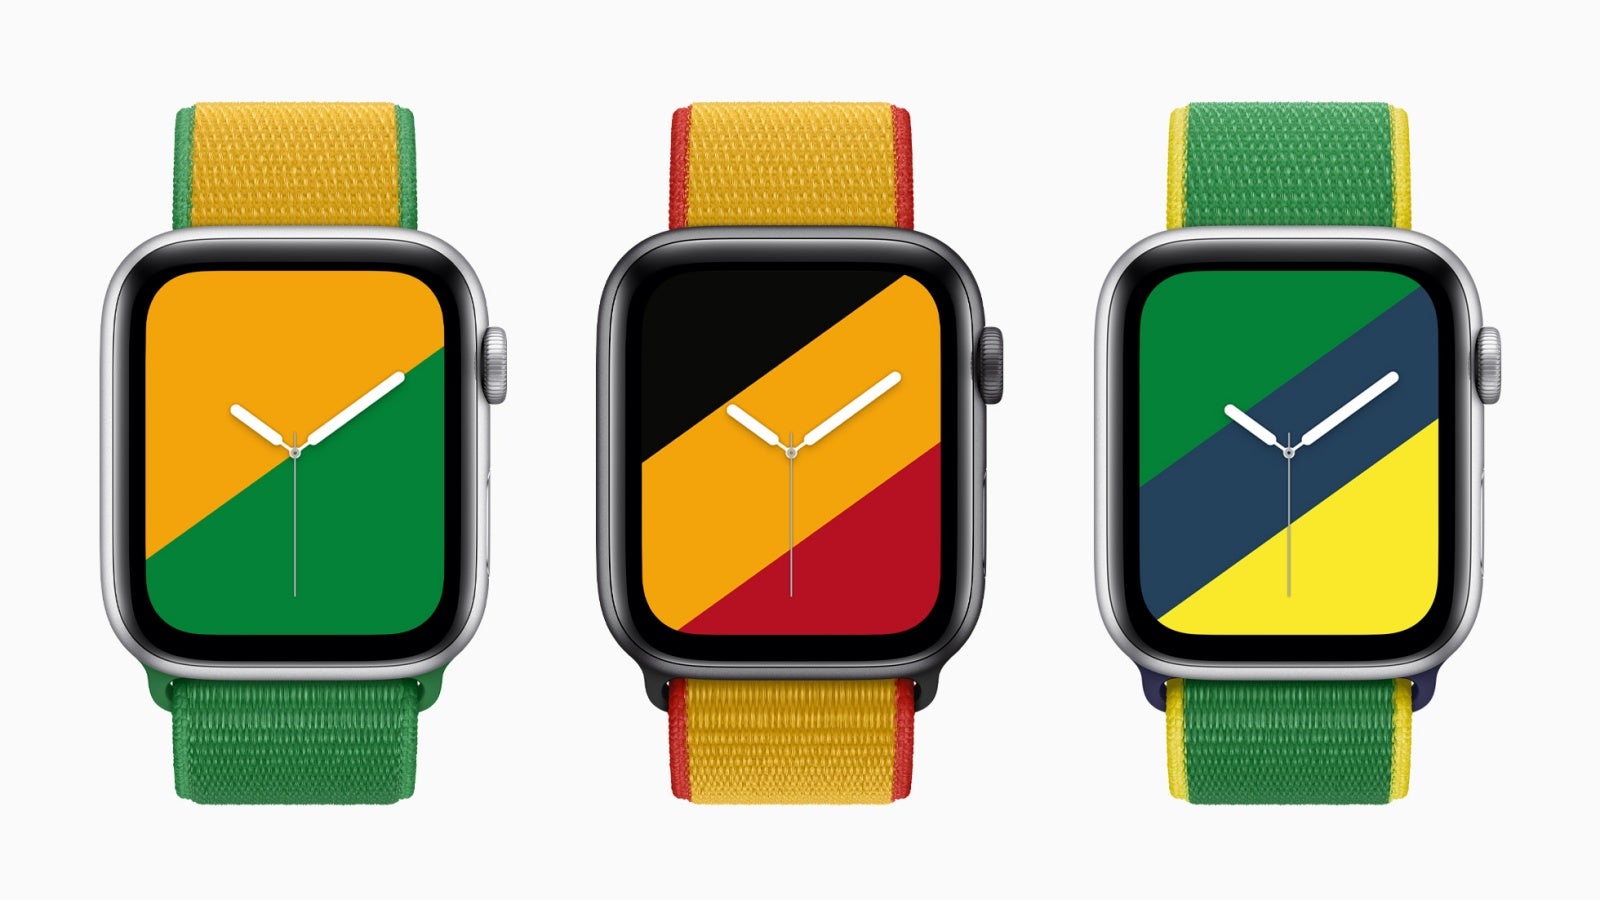 Hot new collection of patriotic Apple Watch bands arrives just in time